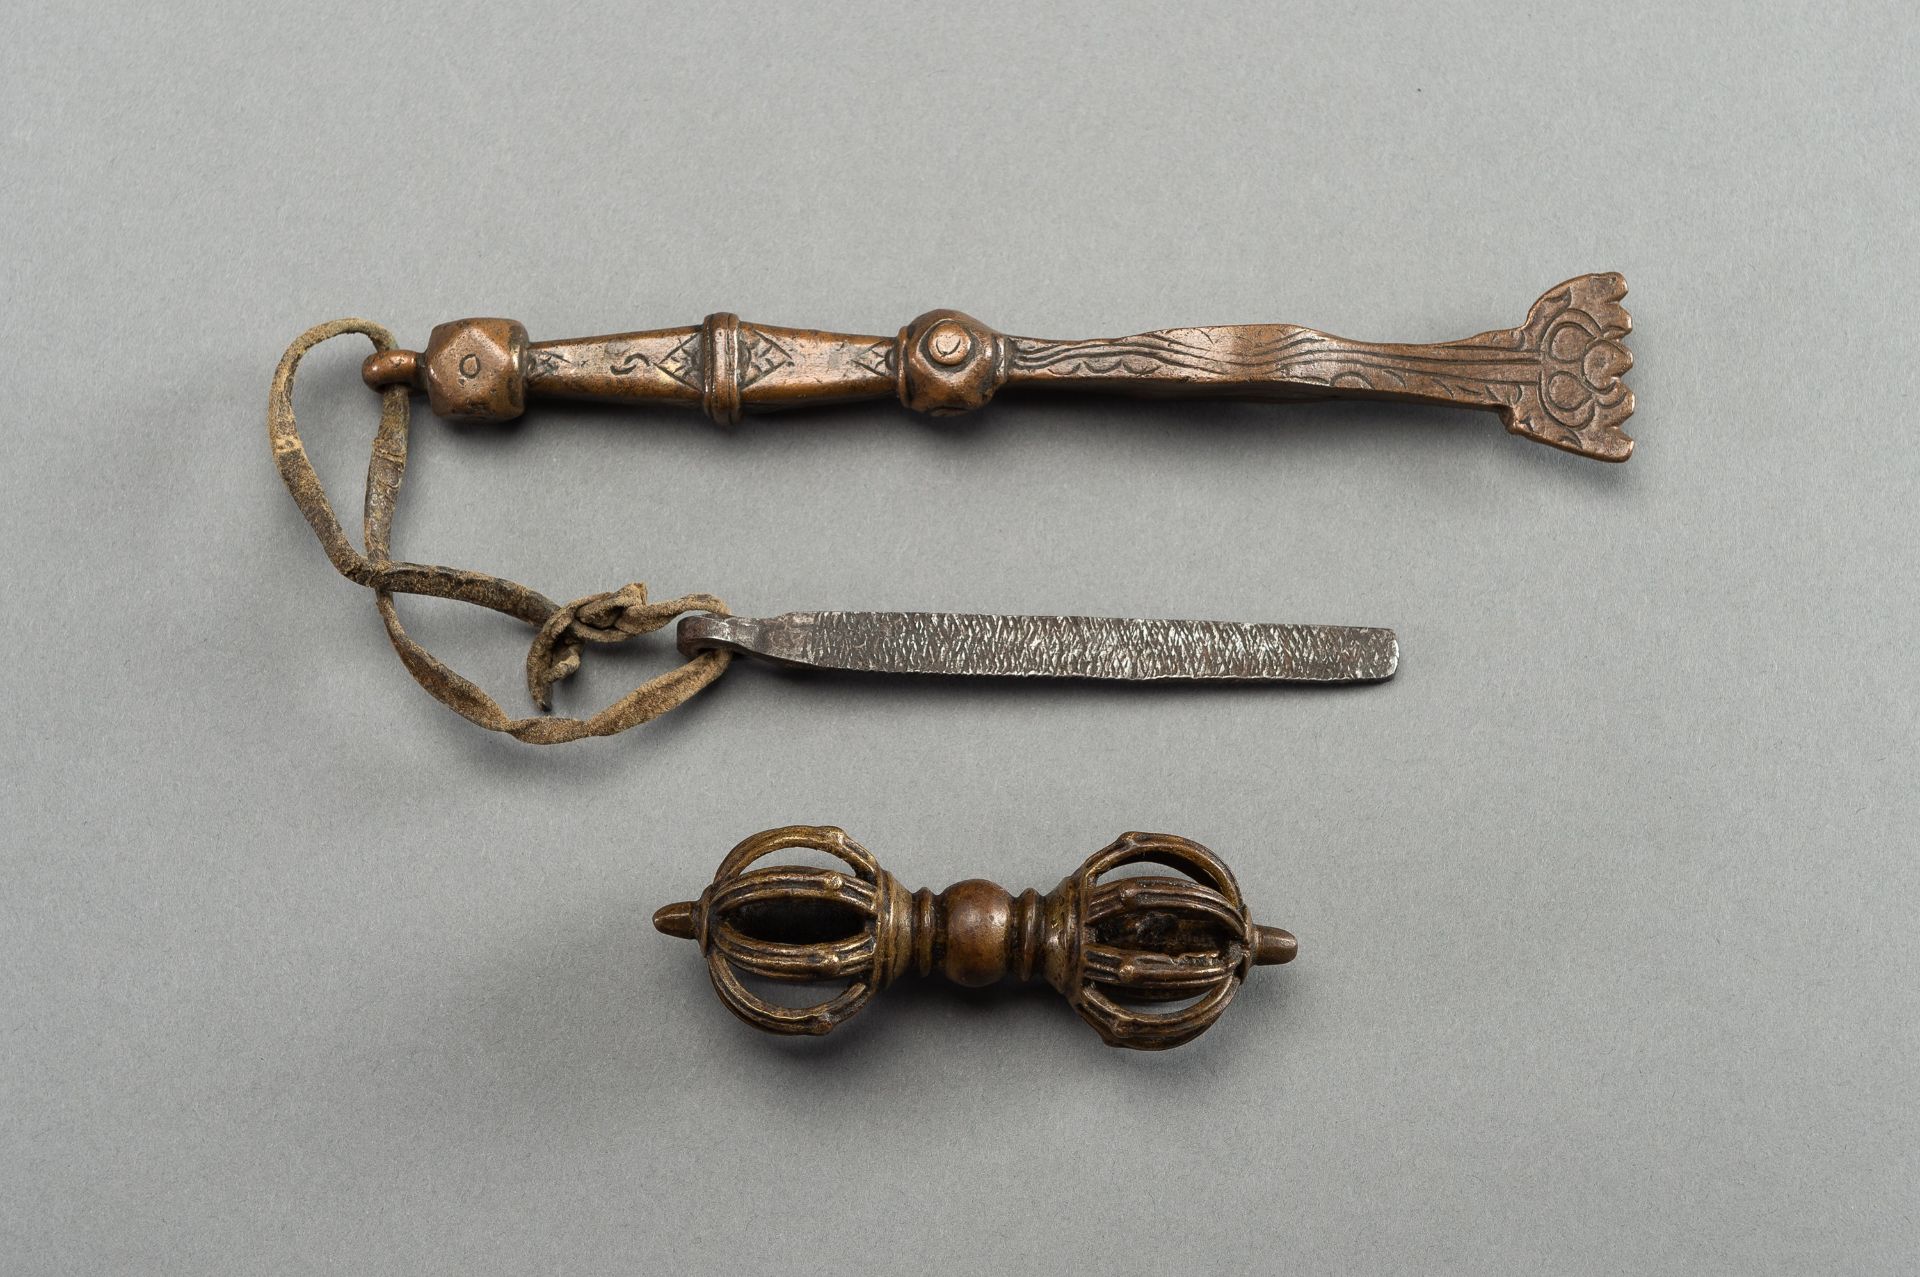 A BRONZE VAJRA AND TWO RITUAL INSTRUMENTS - Image 2 of 7